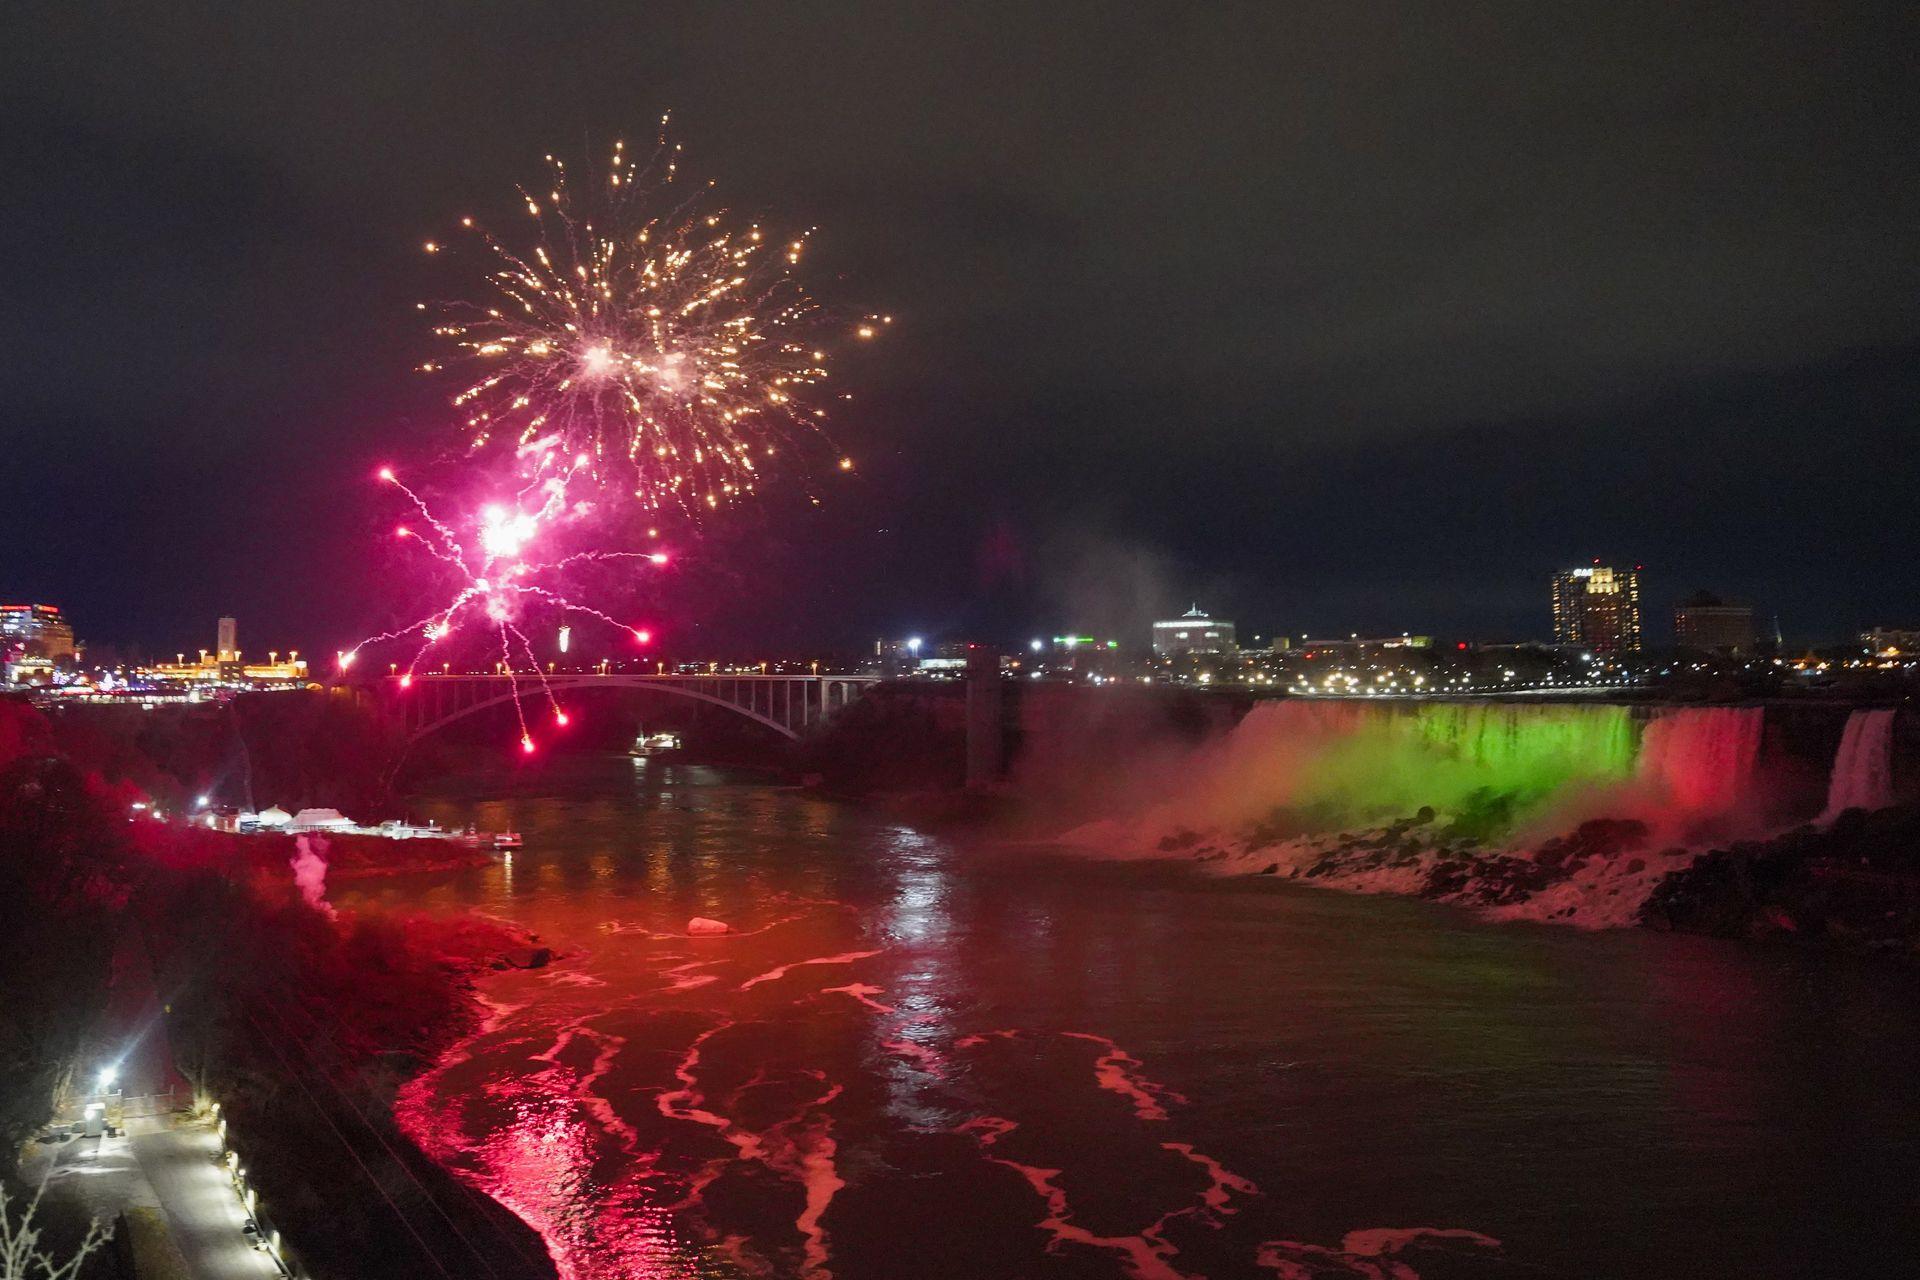 Fireworks over the Niagara River with American Falls lit up in green and red lights to the right.